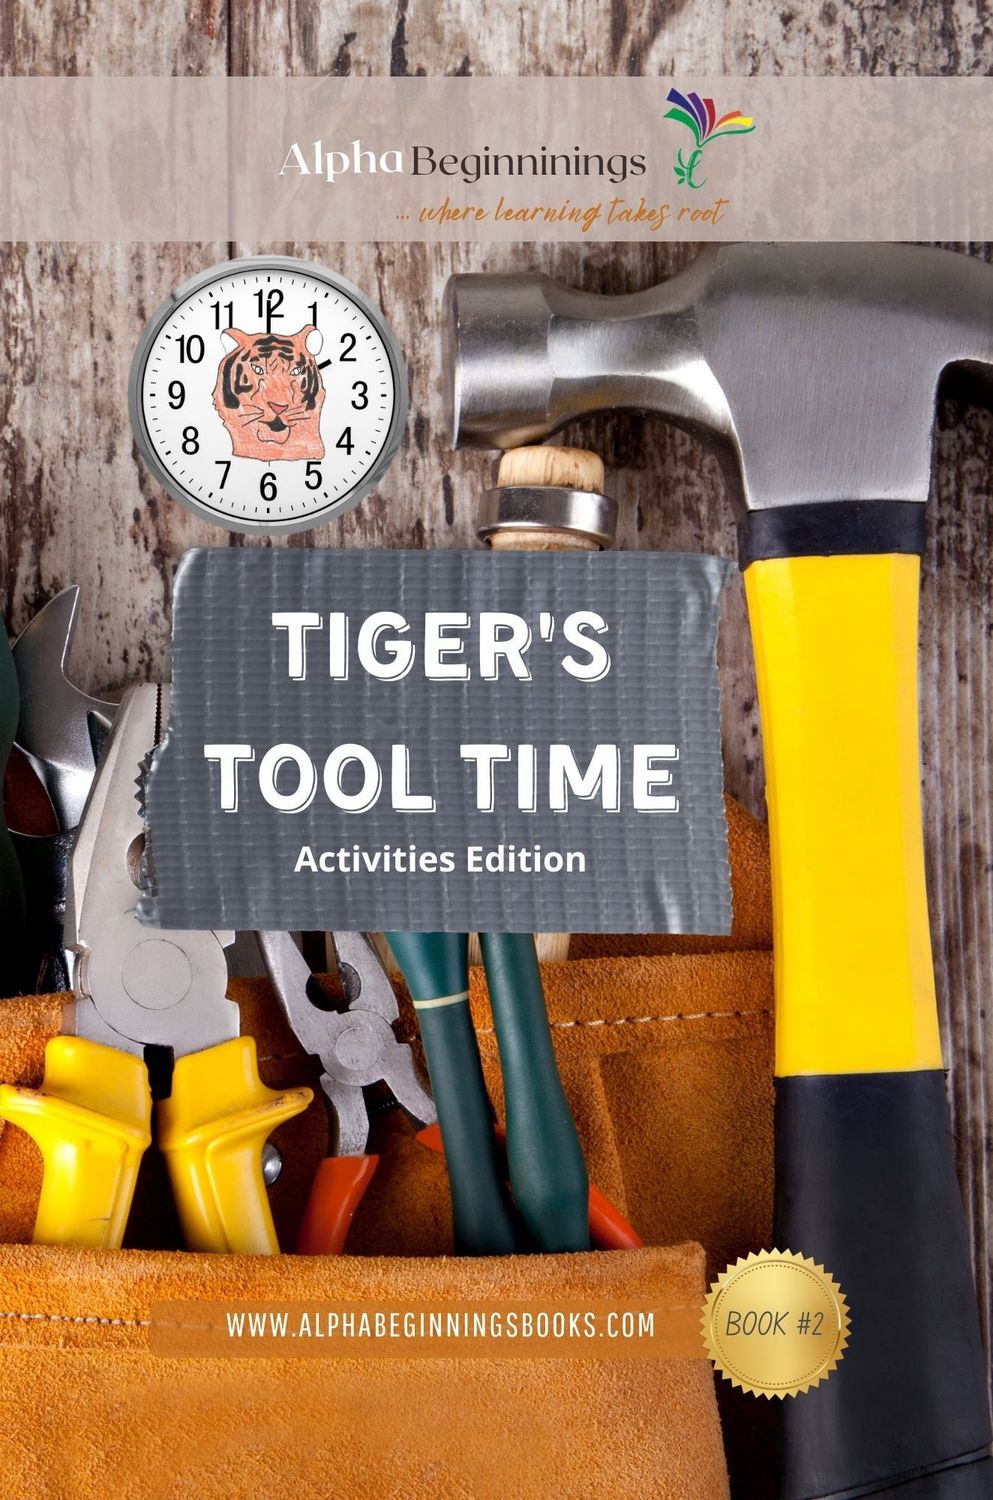 Tiger's Tool Time Activities Edition: eBook